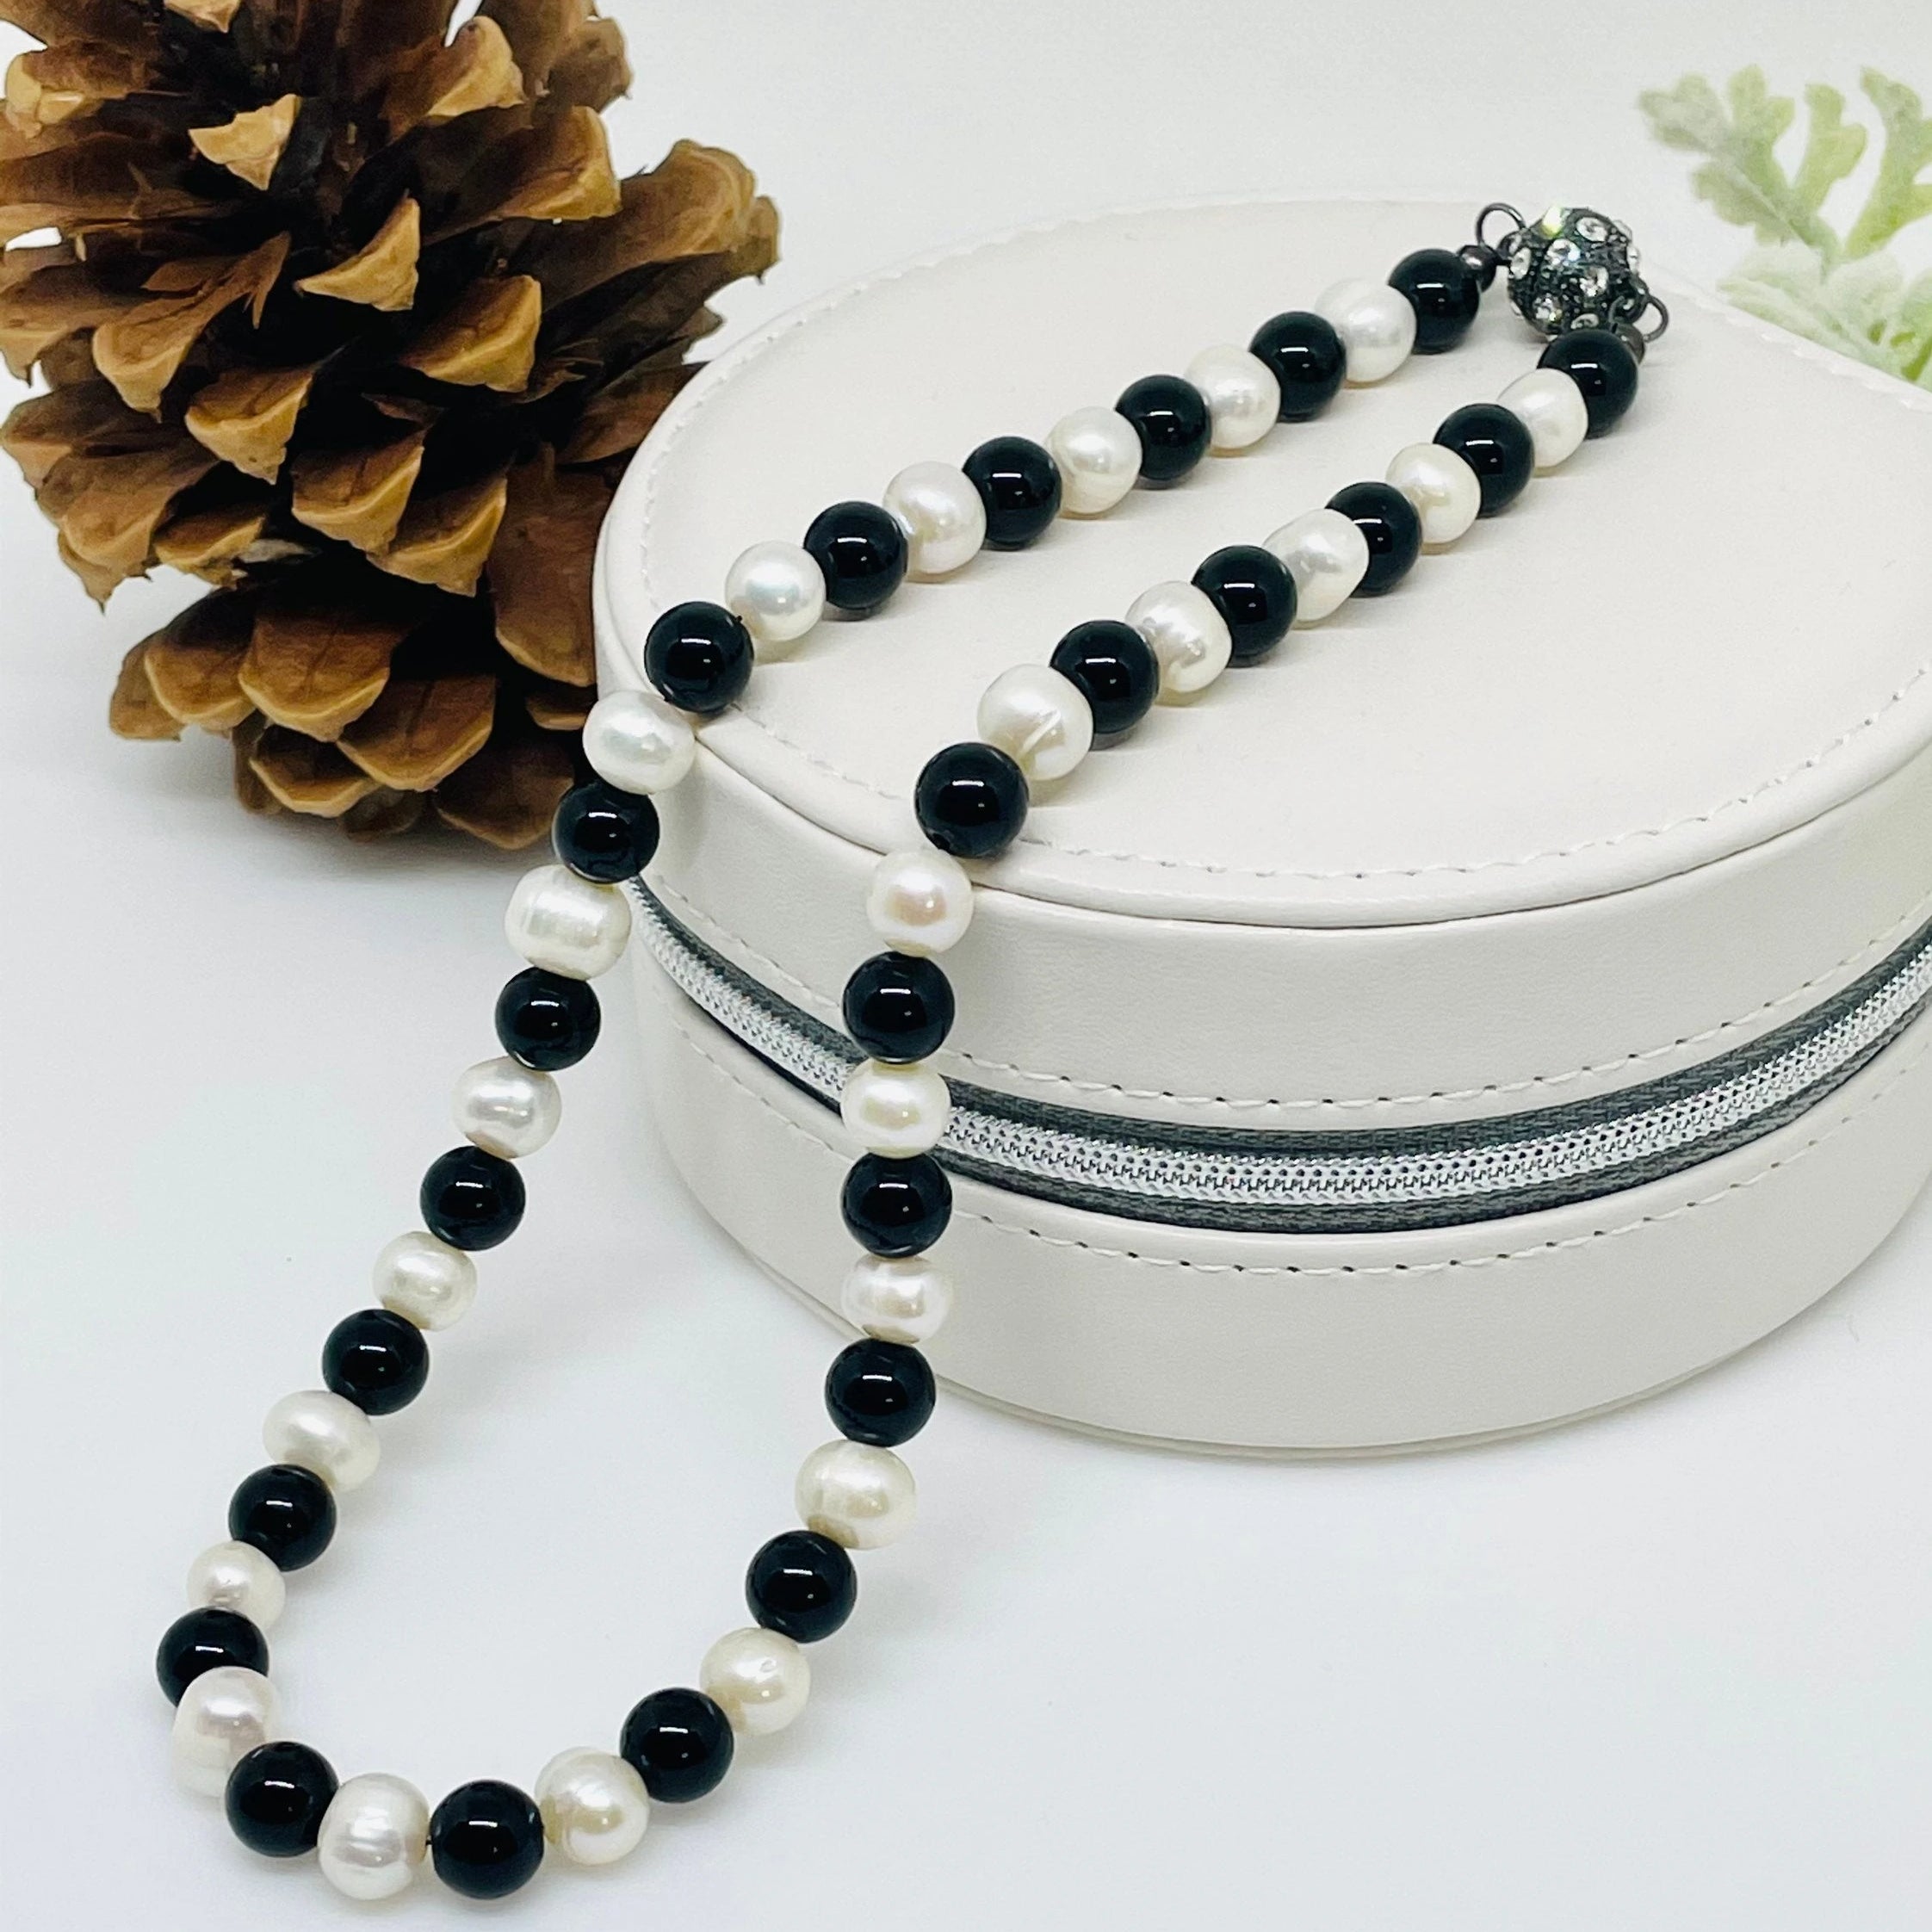 Black and White Necklace with Freshwater Pearl and Black Onyx